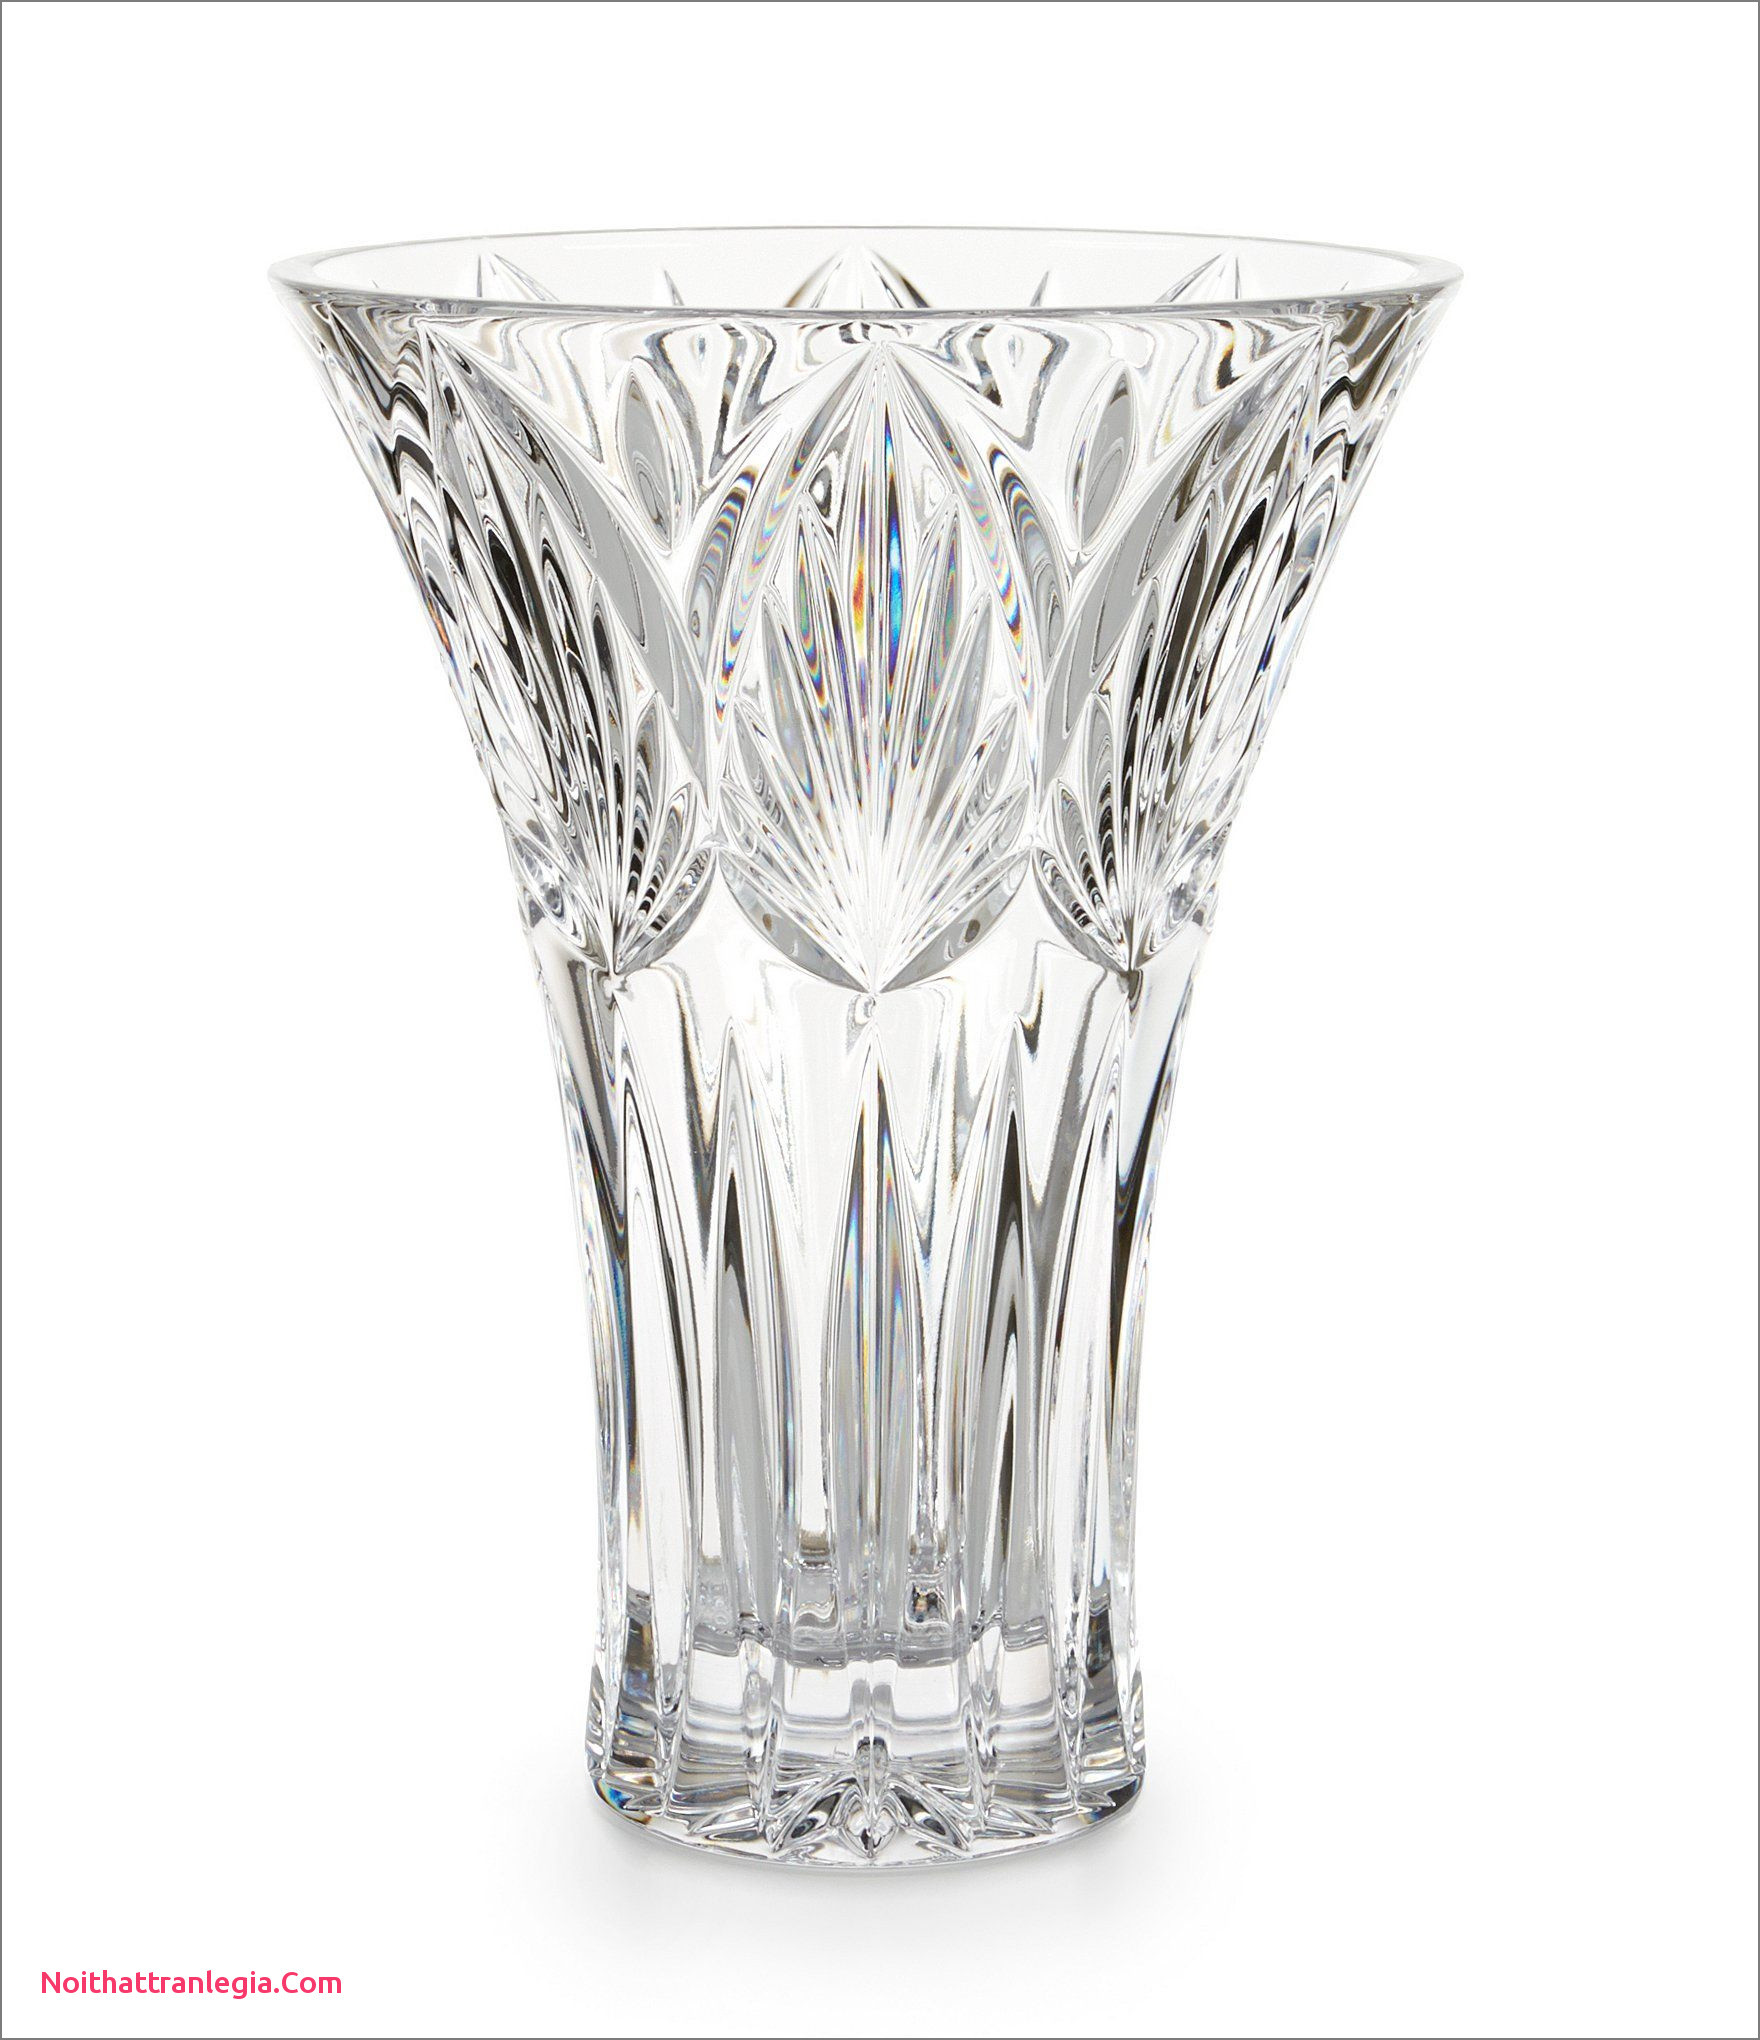 14 Lovable Can You Spray Paint Ceramic Vases 2024 free download can you spray paint ceramic vases of 20 large waterford crystal vase noithattranlegia vases design within large waterford crystal vase best of waterford westbridge crystal vase of large wate